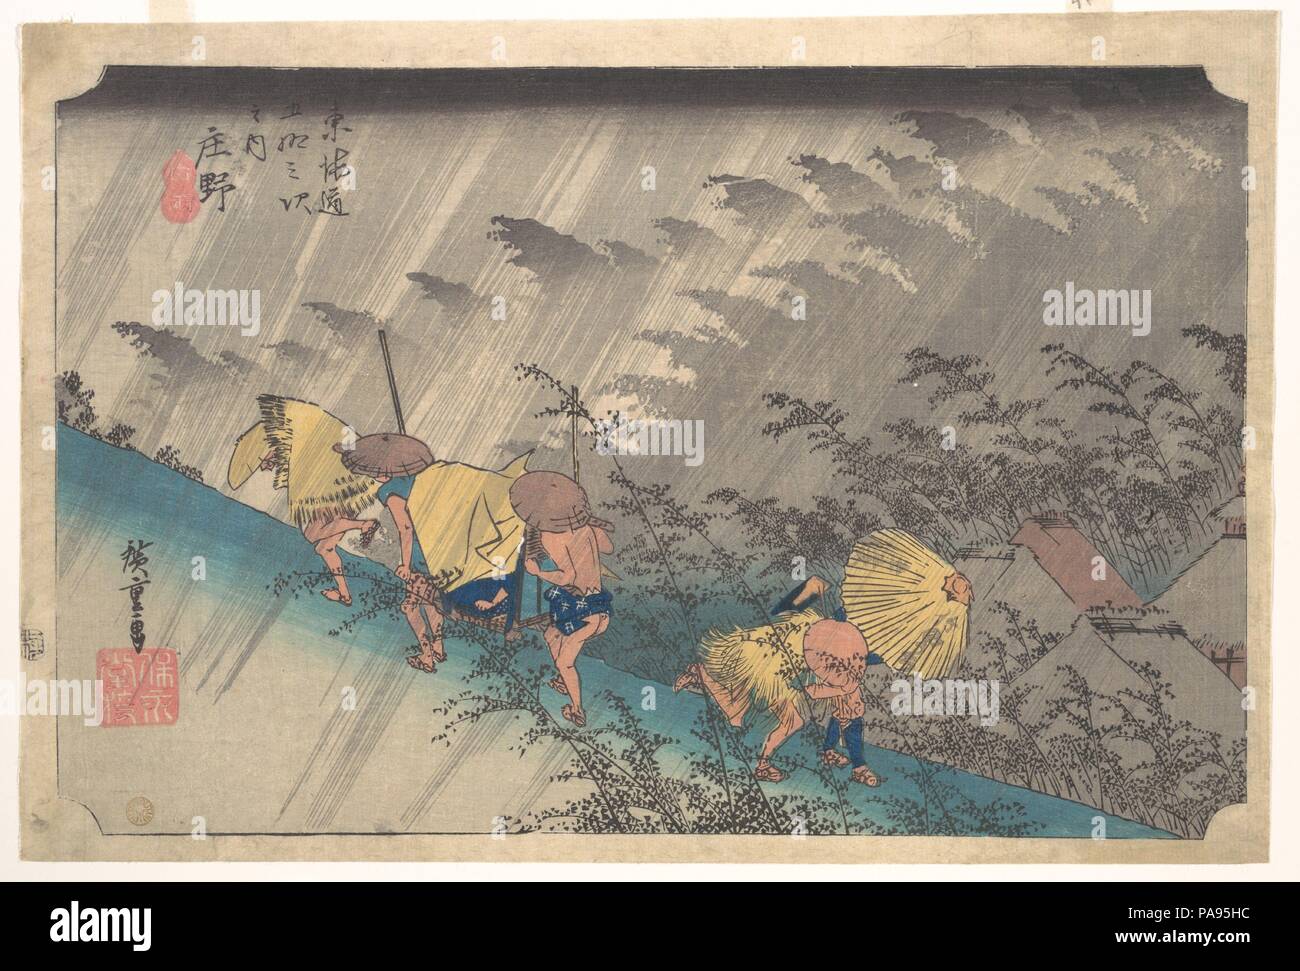 Sudden Shower at Shono, from the series Fifty-three Stations of the Tokaido. Artist: Utagawa Hiroshige (Japanese, Tokyo (Edo) 1797-1858 Tokyo (Edo)). Culture: Japan. Dimensions: Image: 9 3/4 x 14 1/4 in. (24.8 x 36.2 cm). Date: 1834-35.  One of the best-known scenes from this series, Sudden Shower at Shono demonstrates Hiroshige's genius at capturing the sensation of a violent rainstorm. Palanquin bearers and villagers dash through the storm, and sheets of rain are represented with distinct slanted lines. Shono had no view to match the scenery shown here, and it appears that the design was pur Stock Photo